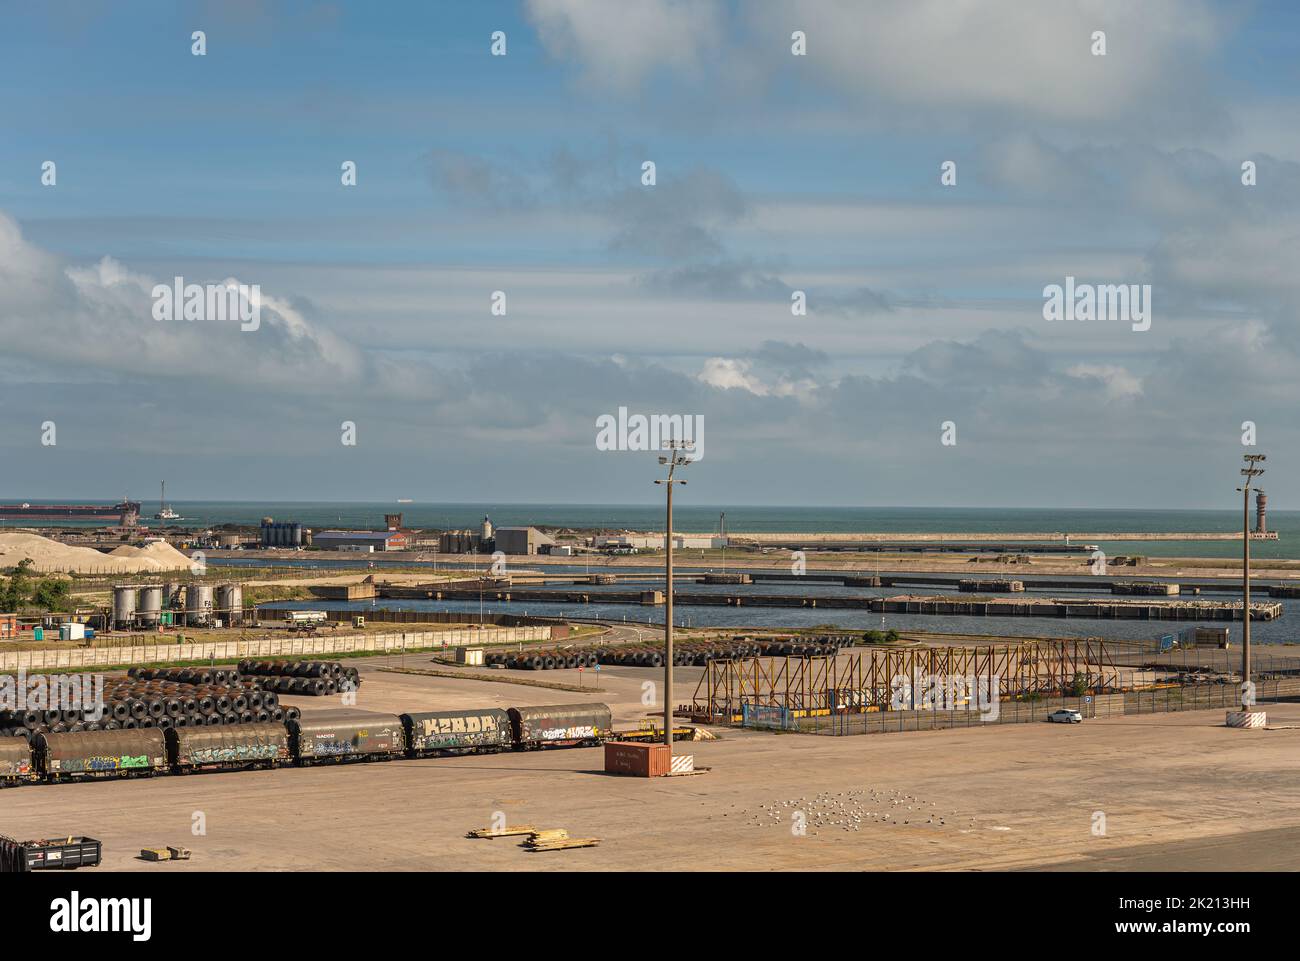 Europe, France, Dunkerque - July 9, 2022: Port scenery quay 6. Stored steel plate roles with train wagons nearby. Looking towards North Sea showing mo Stock Photo